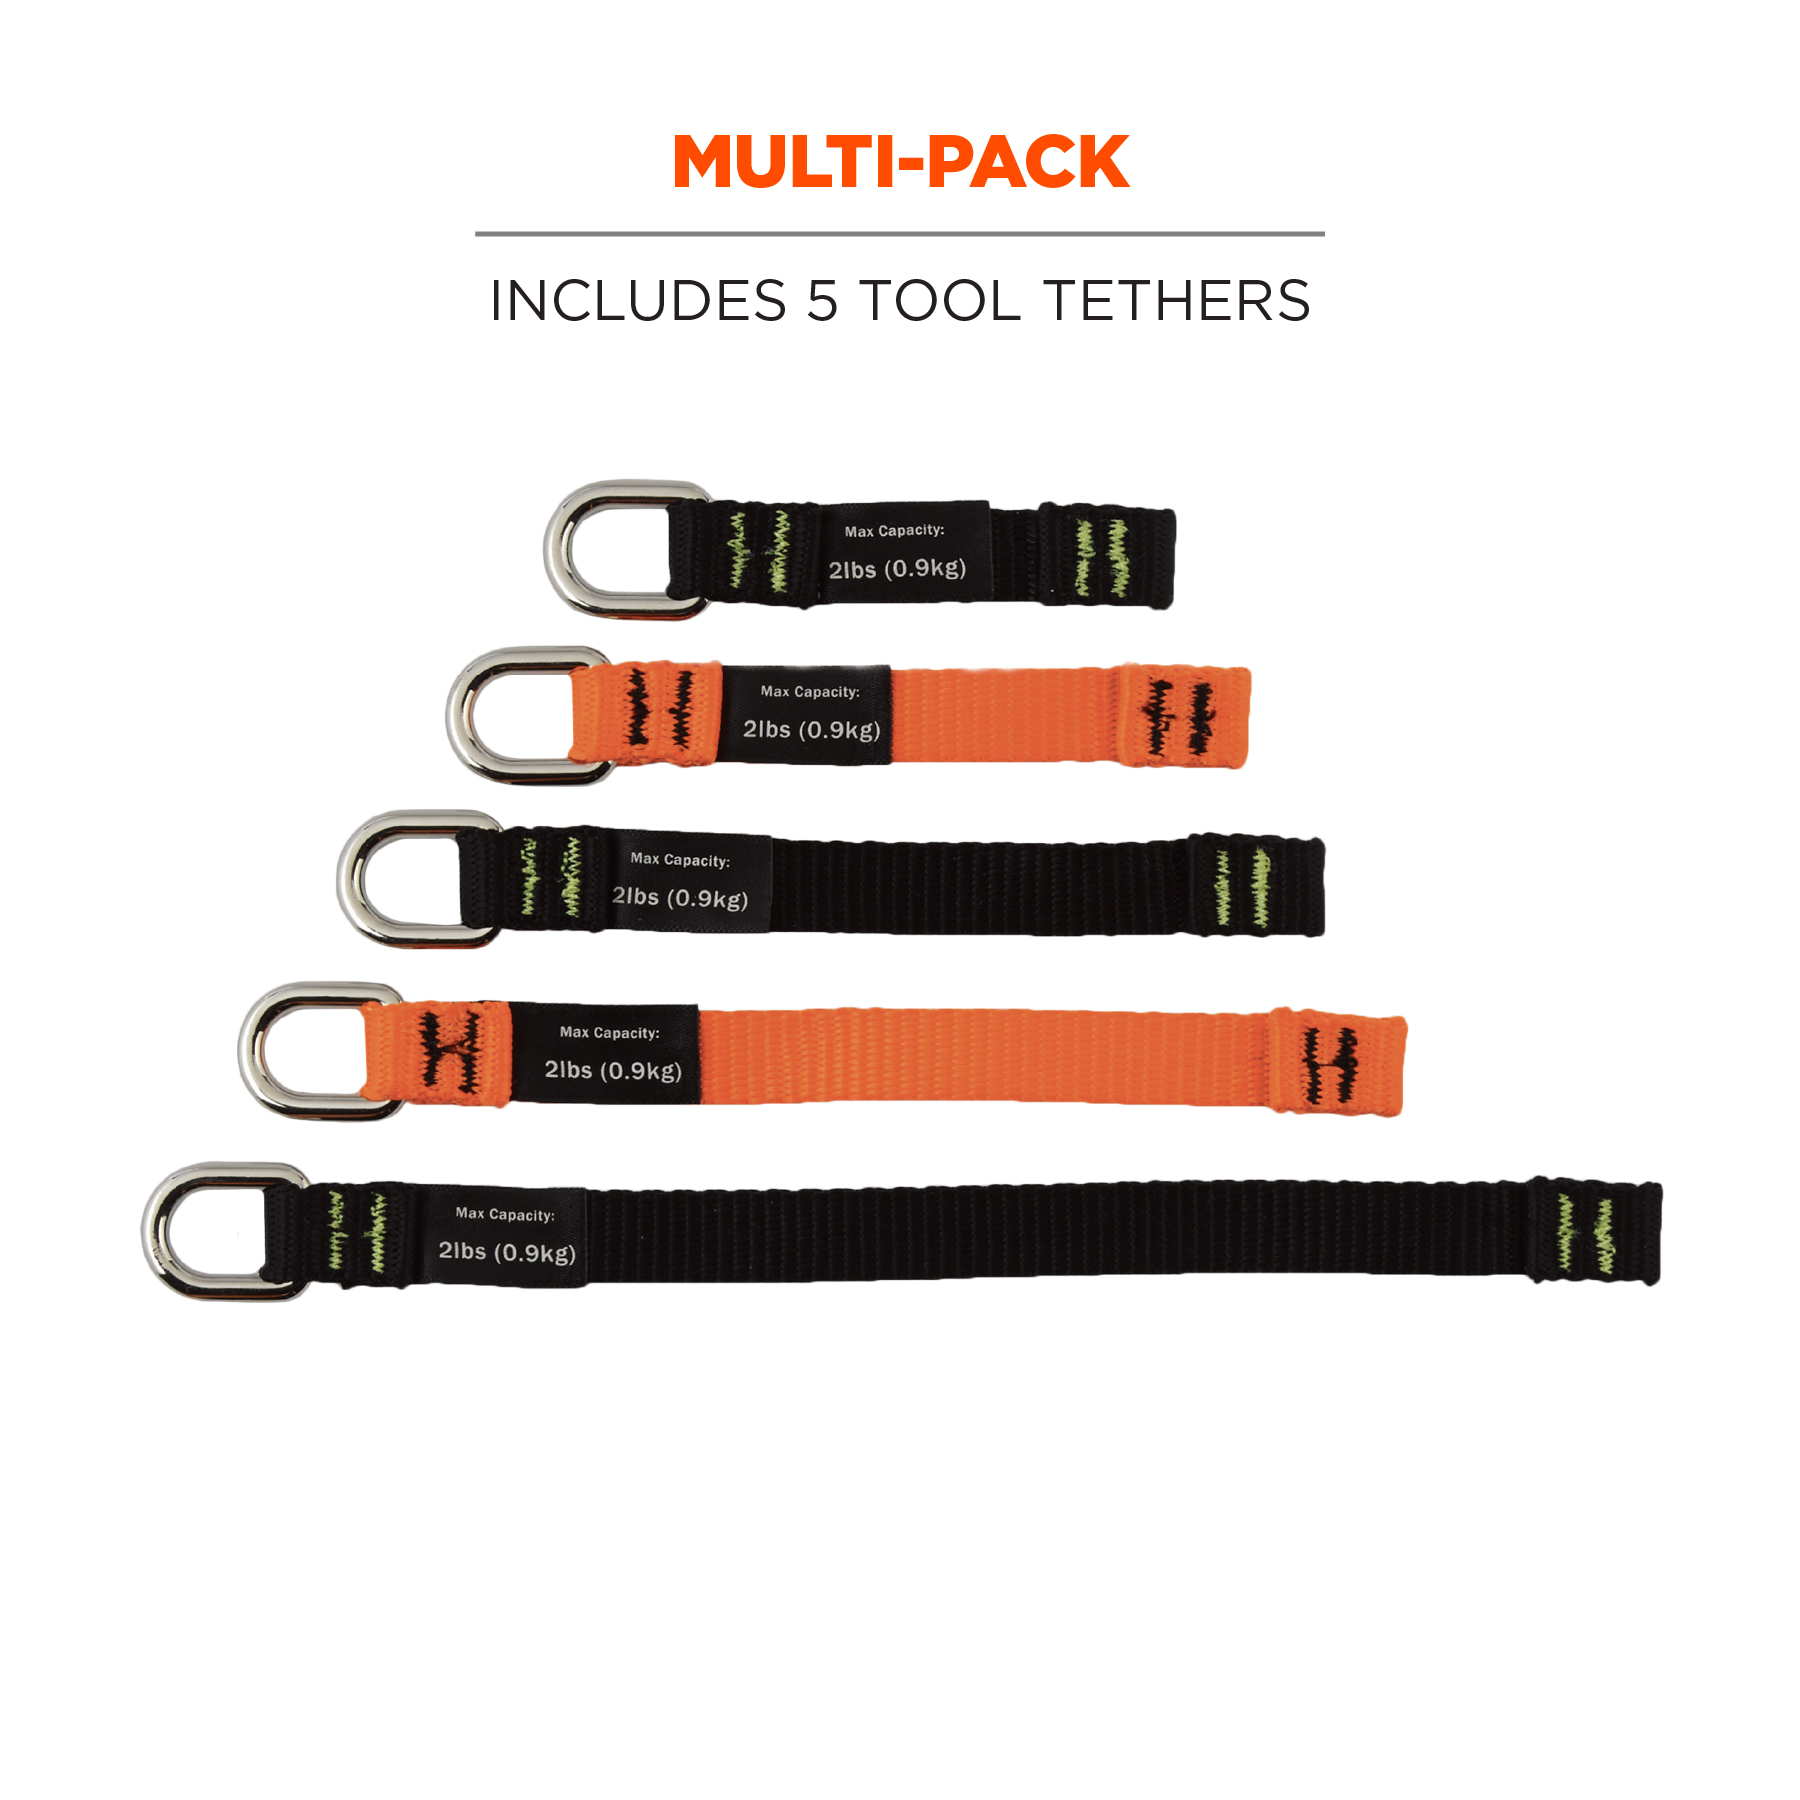 https://www.ergodyne.com/sites/default/files/product-images/19701-3700-web-tool-tail-tether-attachment-black-and-orange-multi-pack_0.jpg